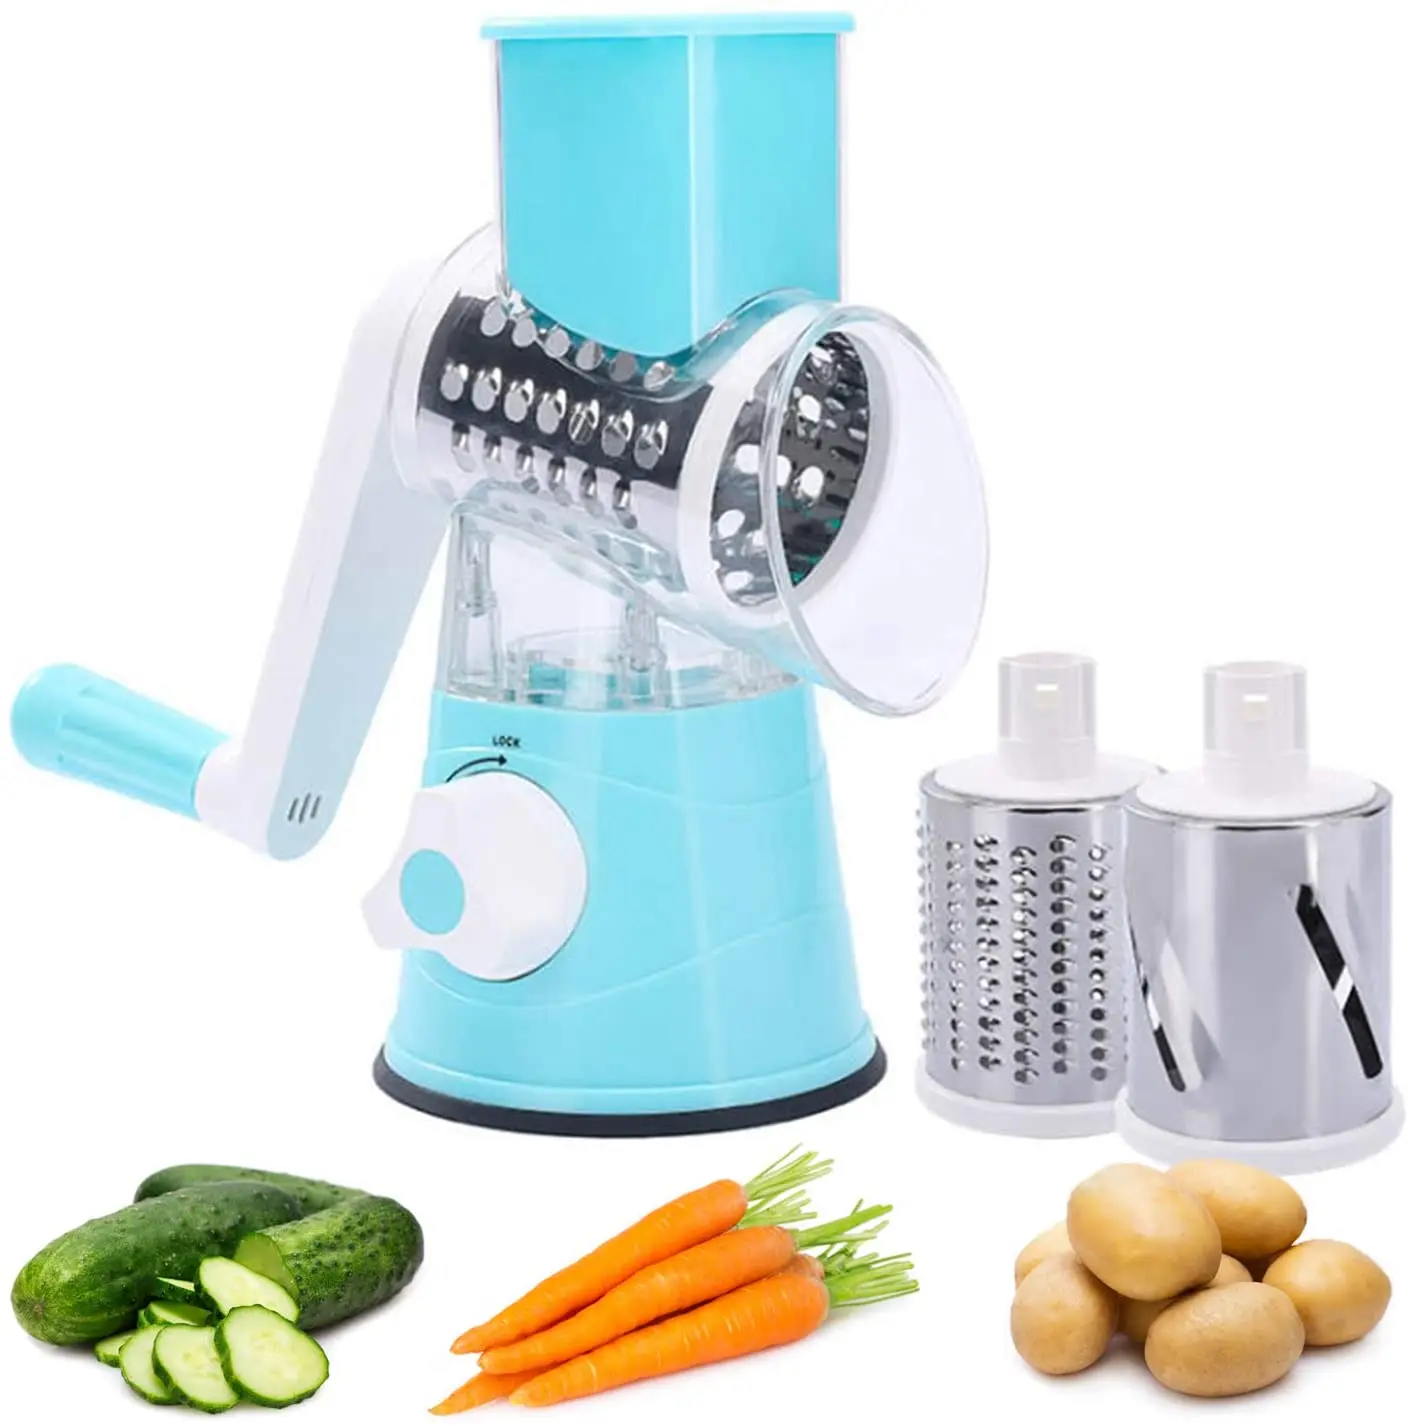 

Amazon hot sale 3 in 1 kitchen accessory handheld manual cheese grater grinding shredder food chopper rotary vegetable slicer, Green, red, blue